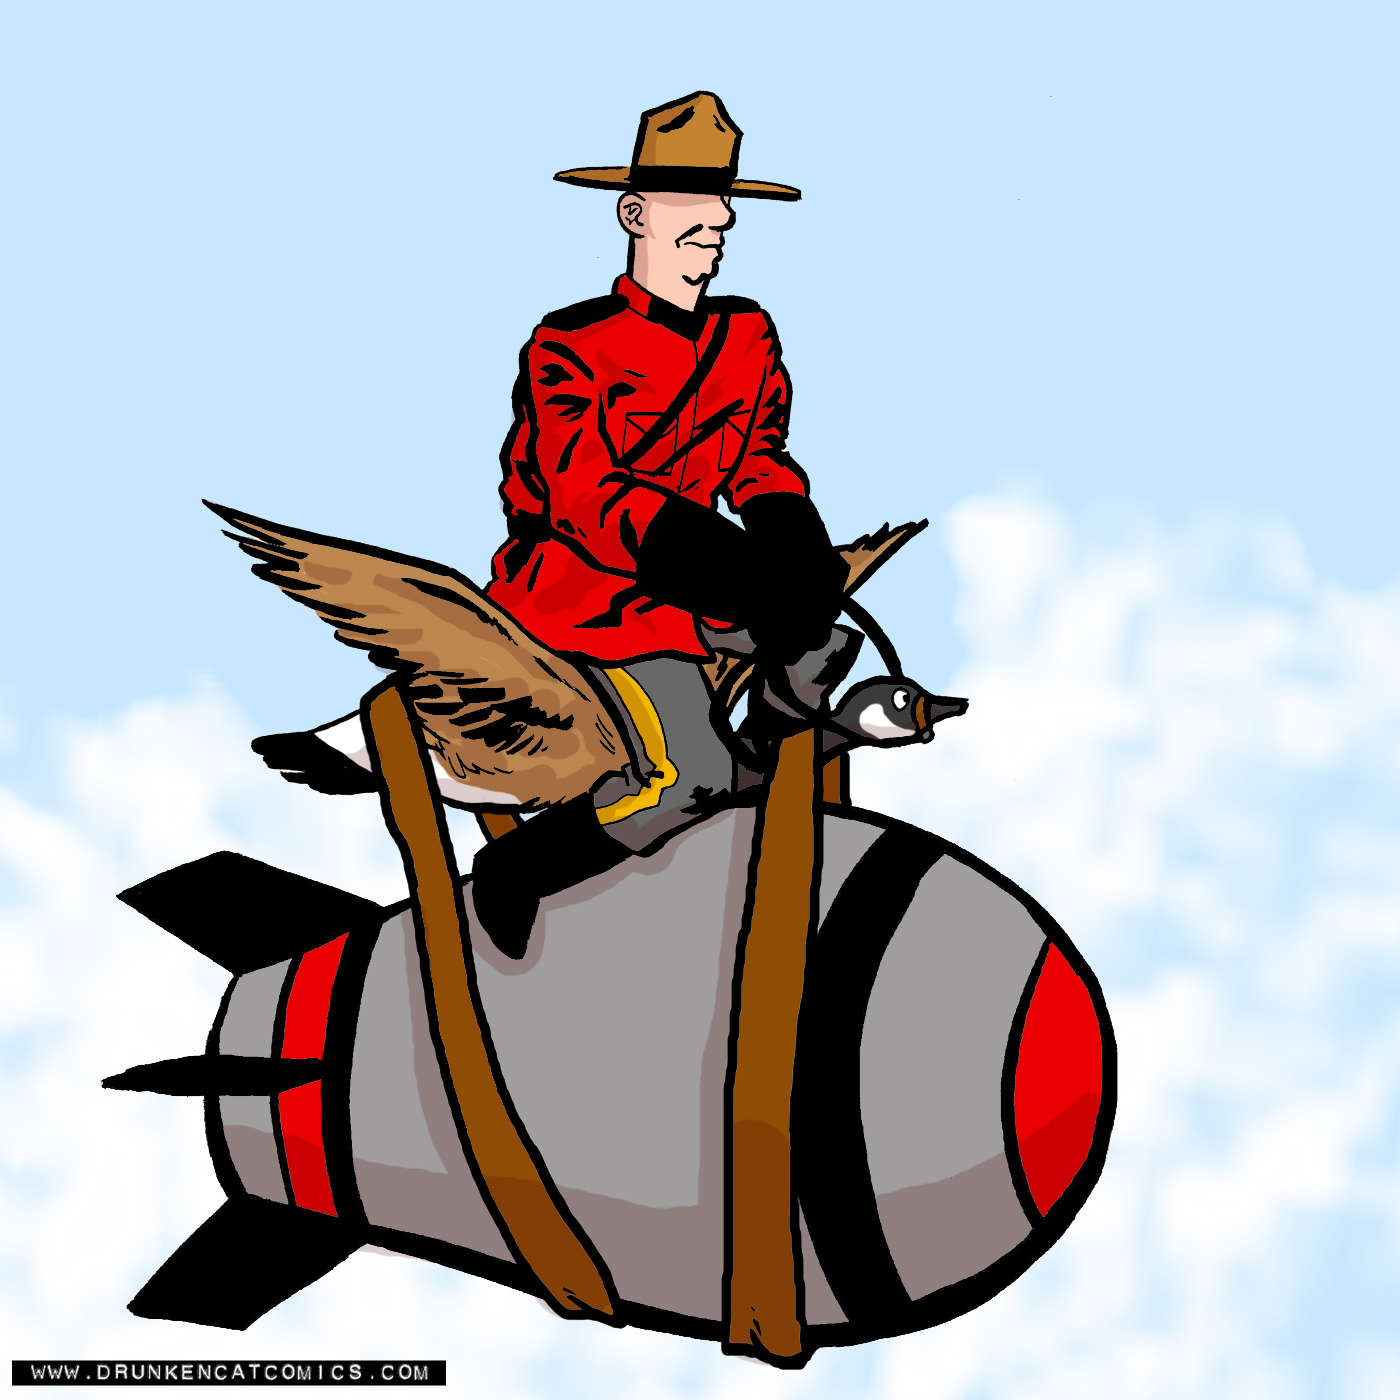 No One Ever Expects the Canadian Air Mounties